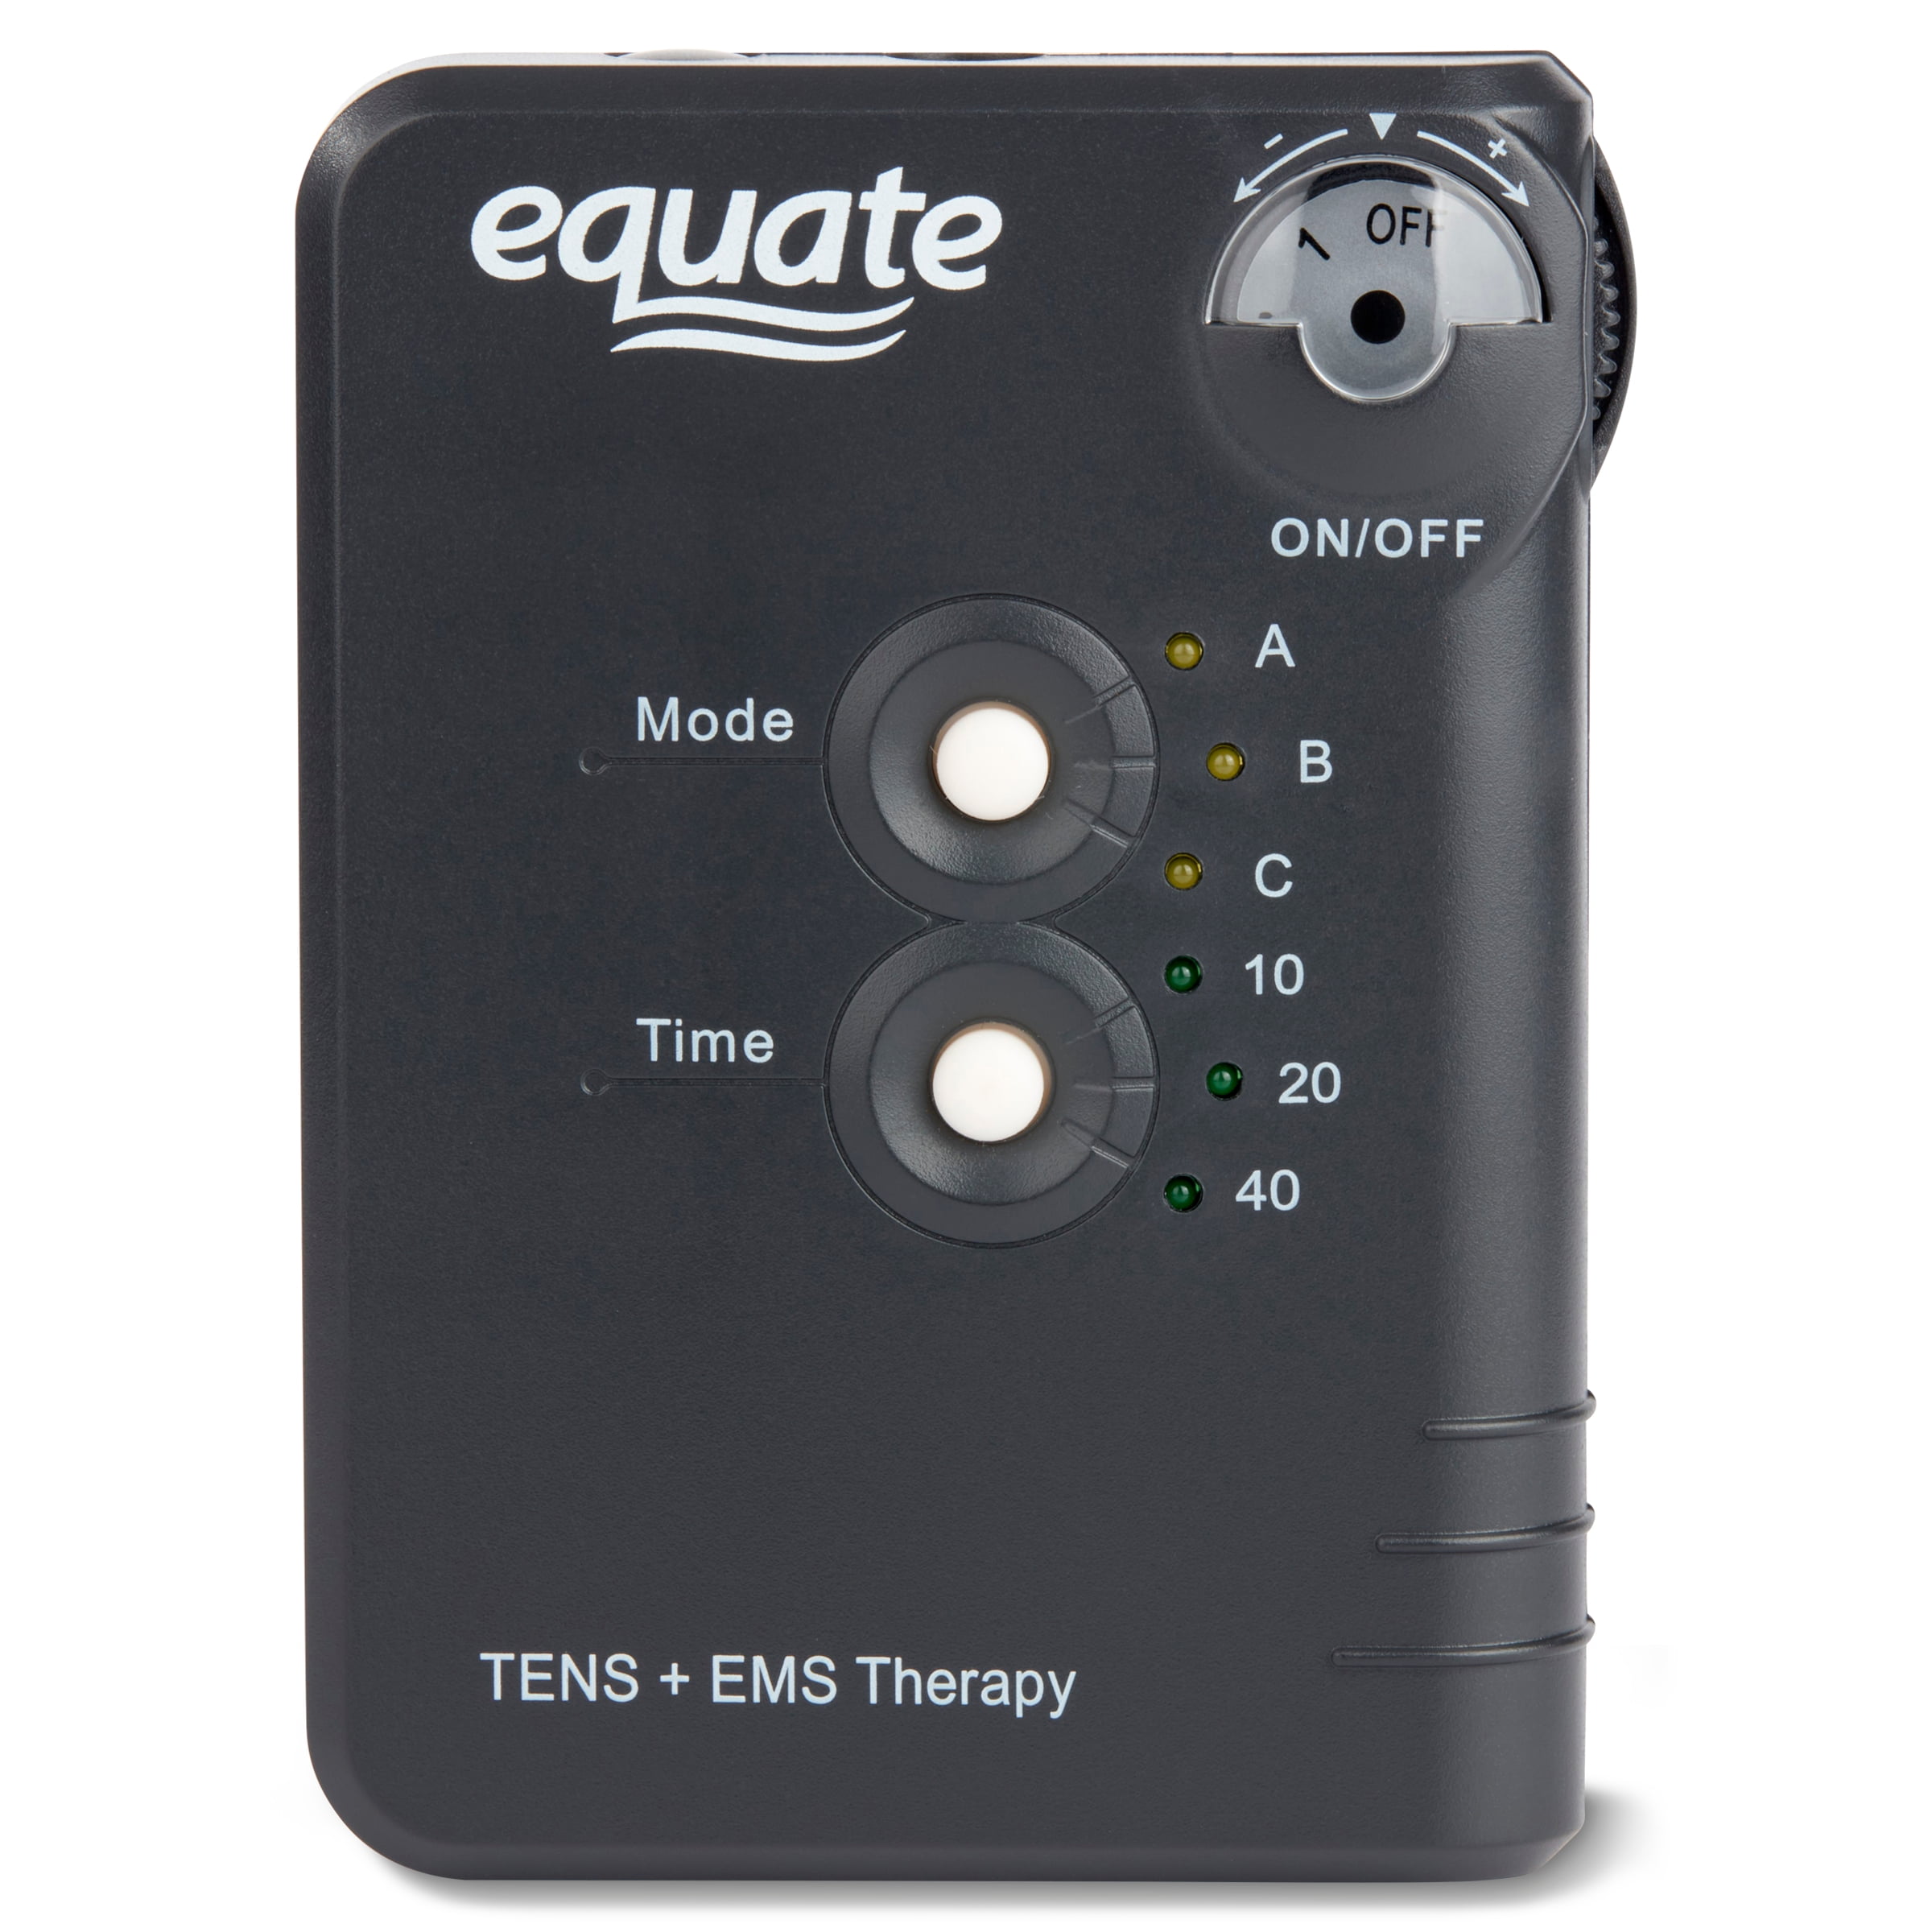 EMS & TENS Units for Pain Relief - Oxiline